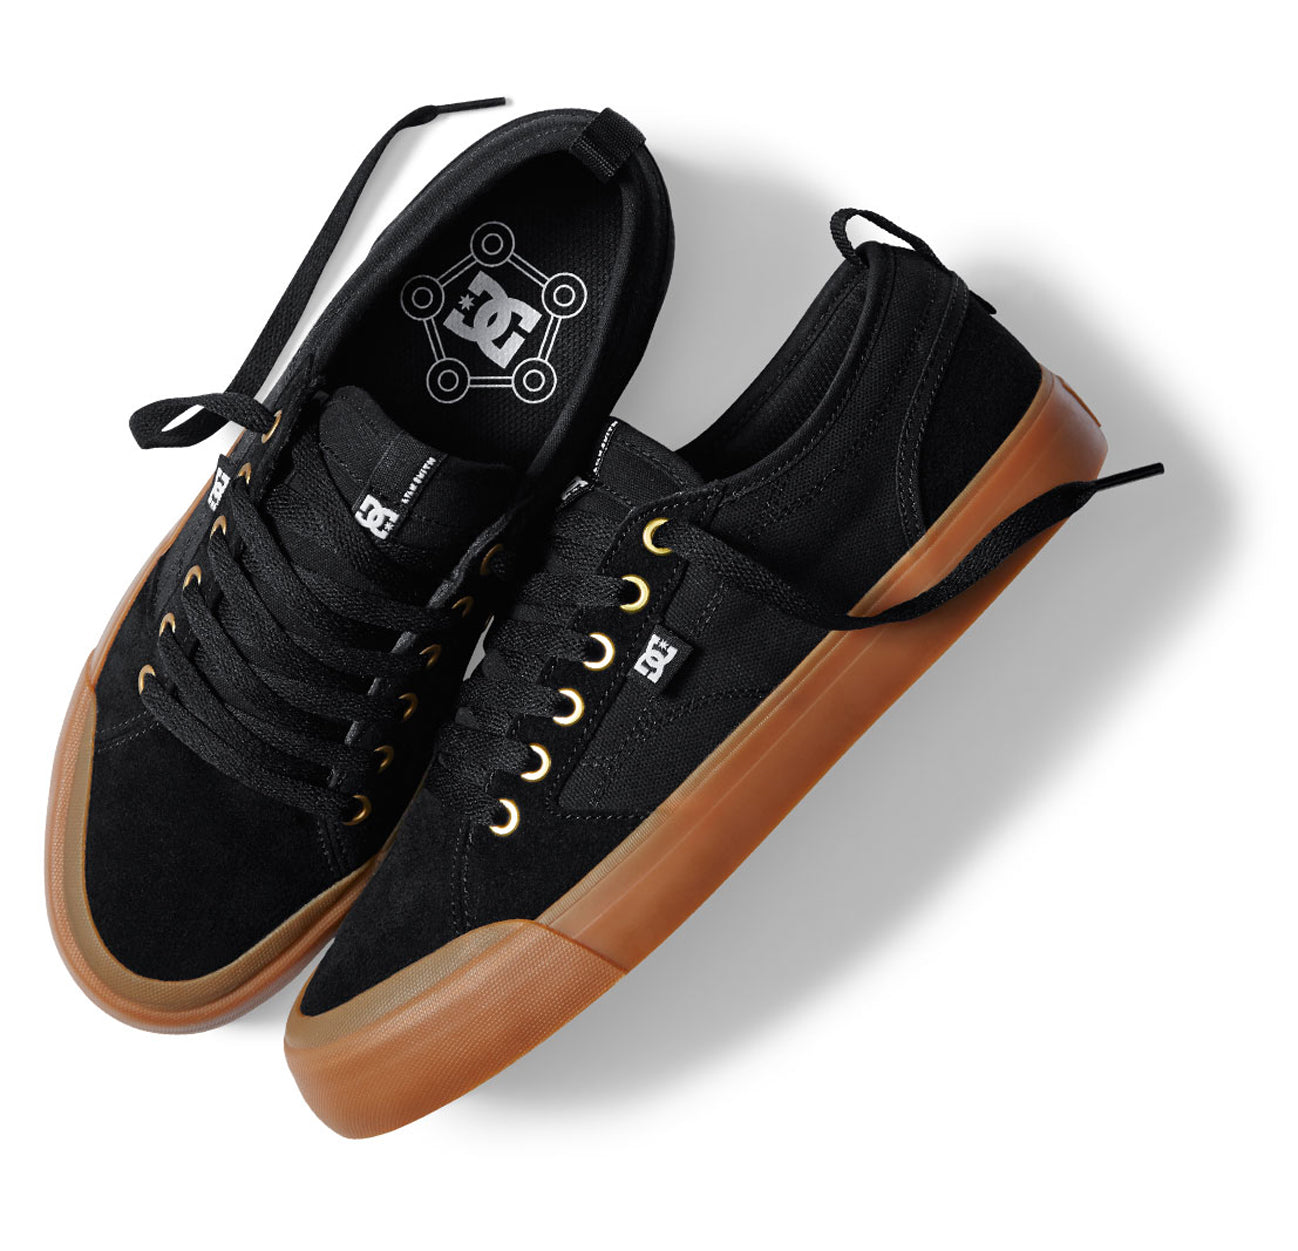 DC Shoes 2016 Spring Evan Smith Collection from Haustrom.com - DC Shoes Footwear Fashion Apparel - Men's Evan Smith Hi High Top Shoes